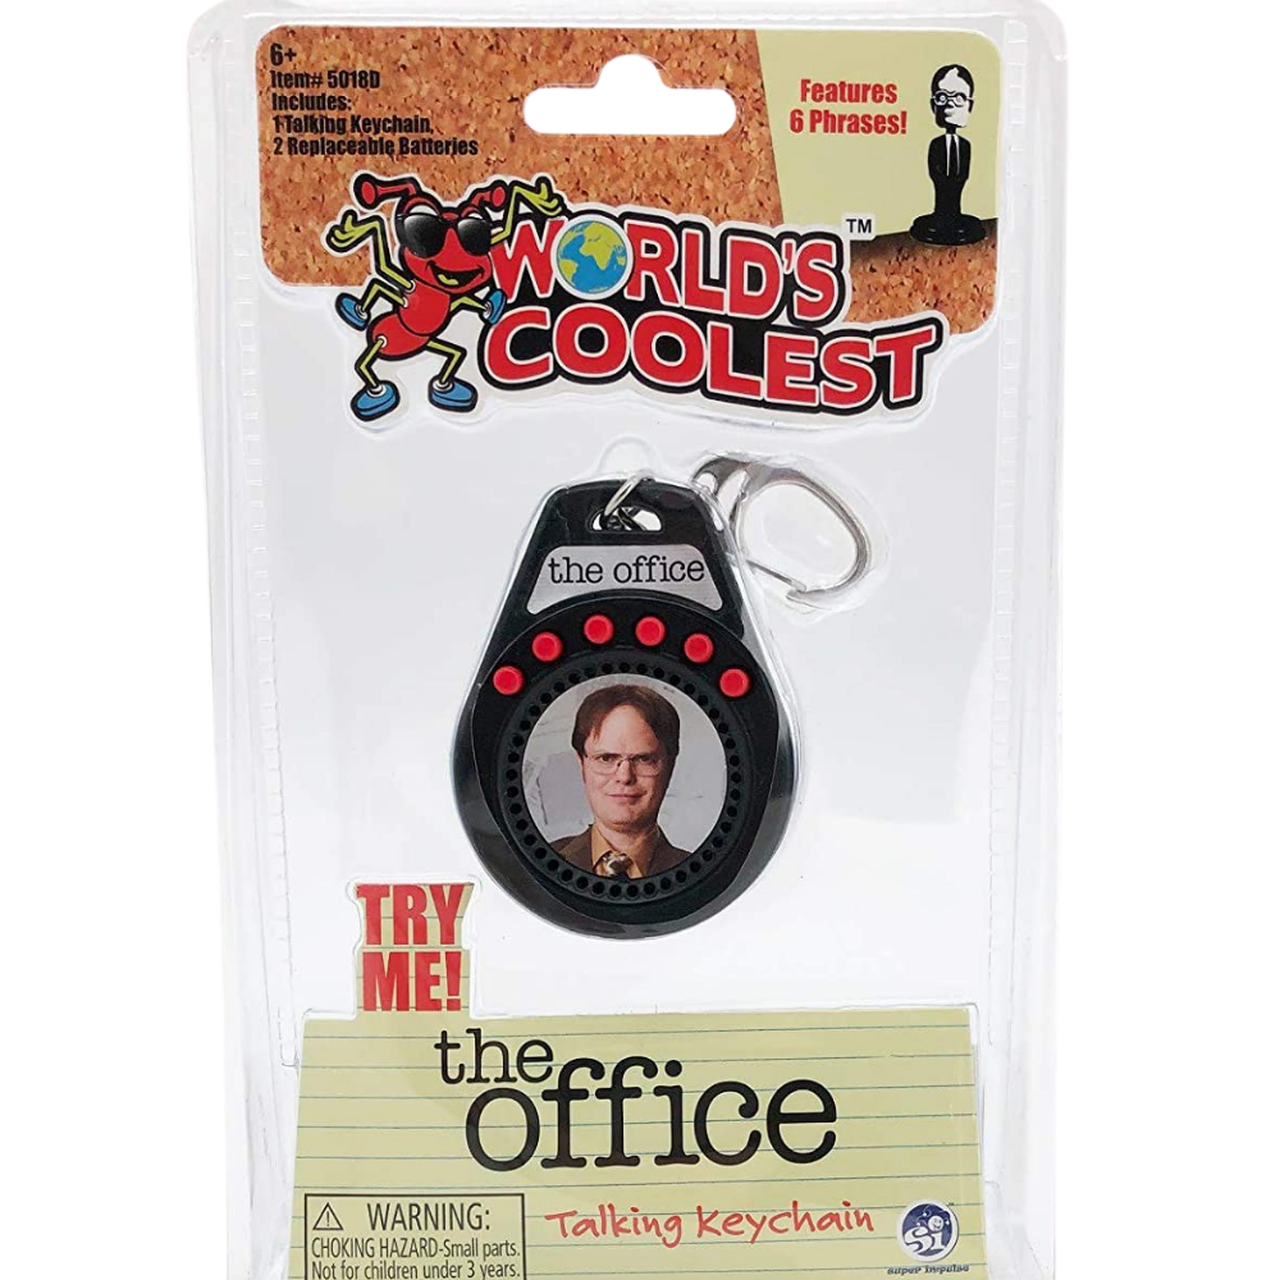 World's Coolest "The Office" Talking Keychain Dwight - Ages 8+